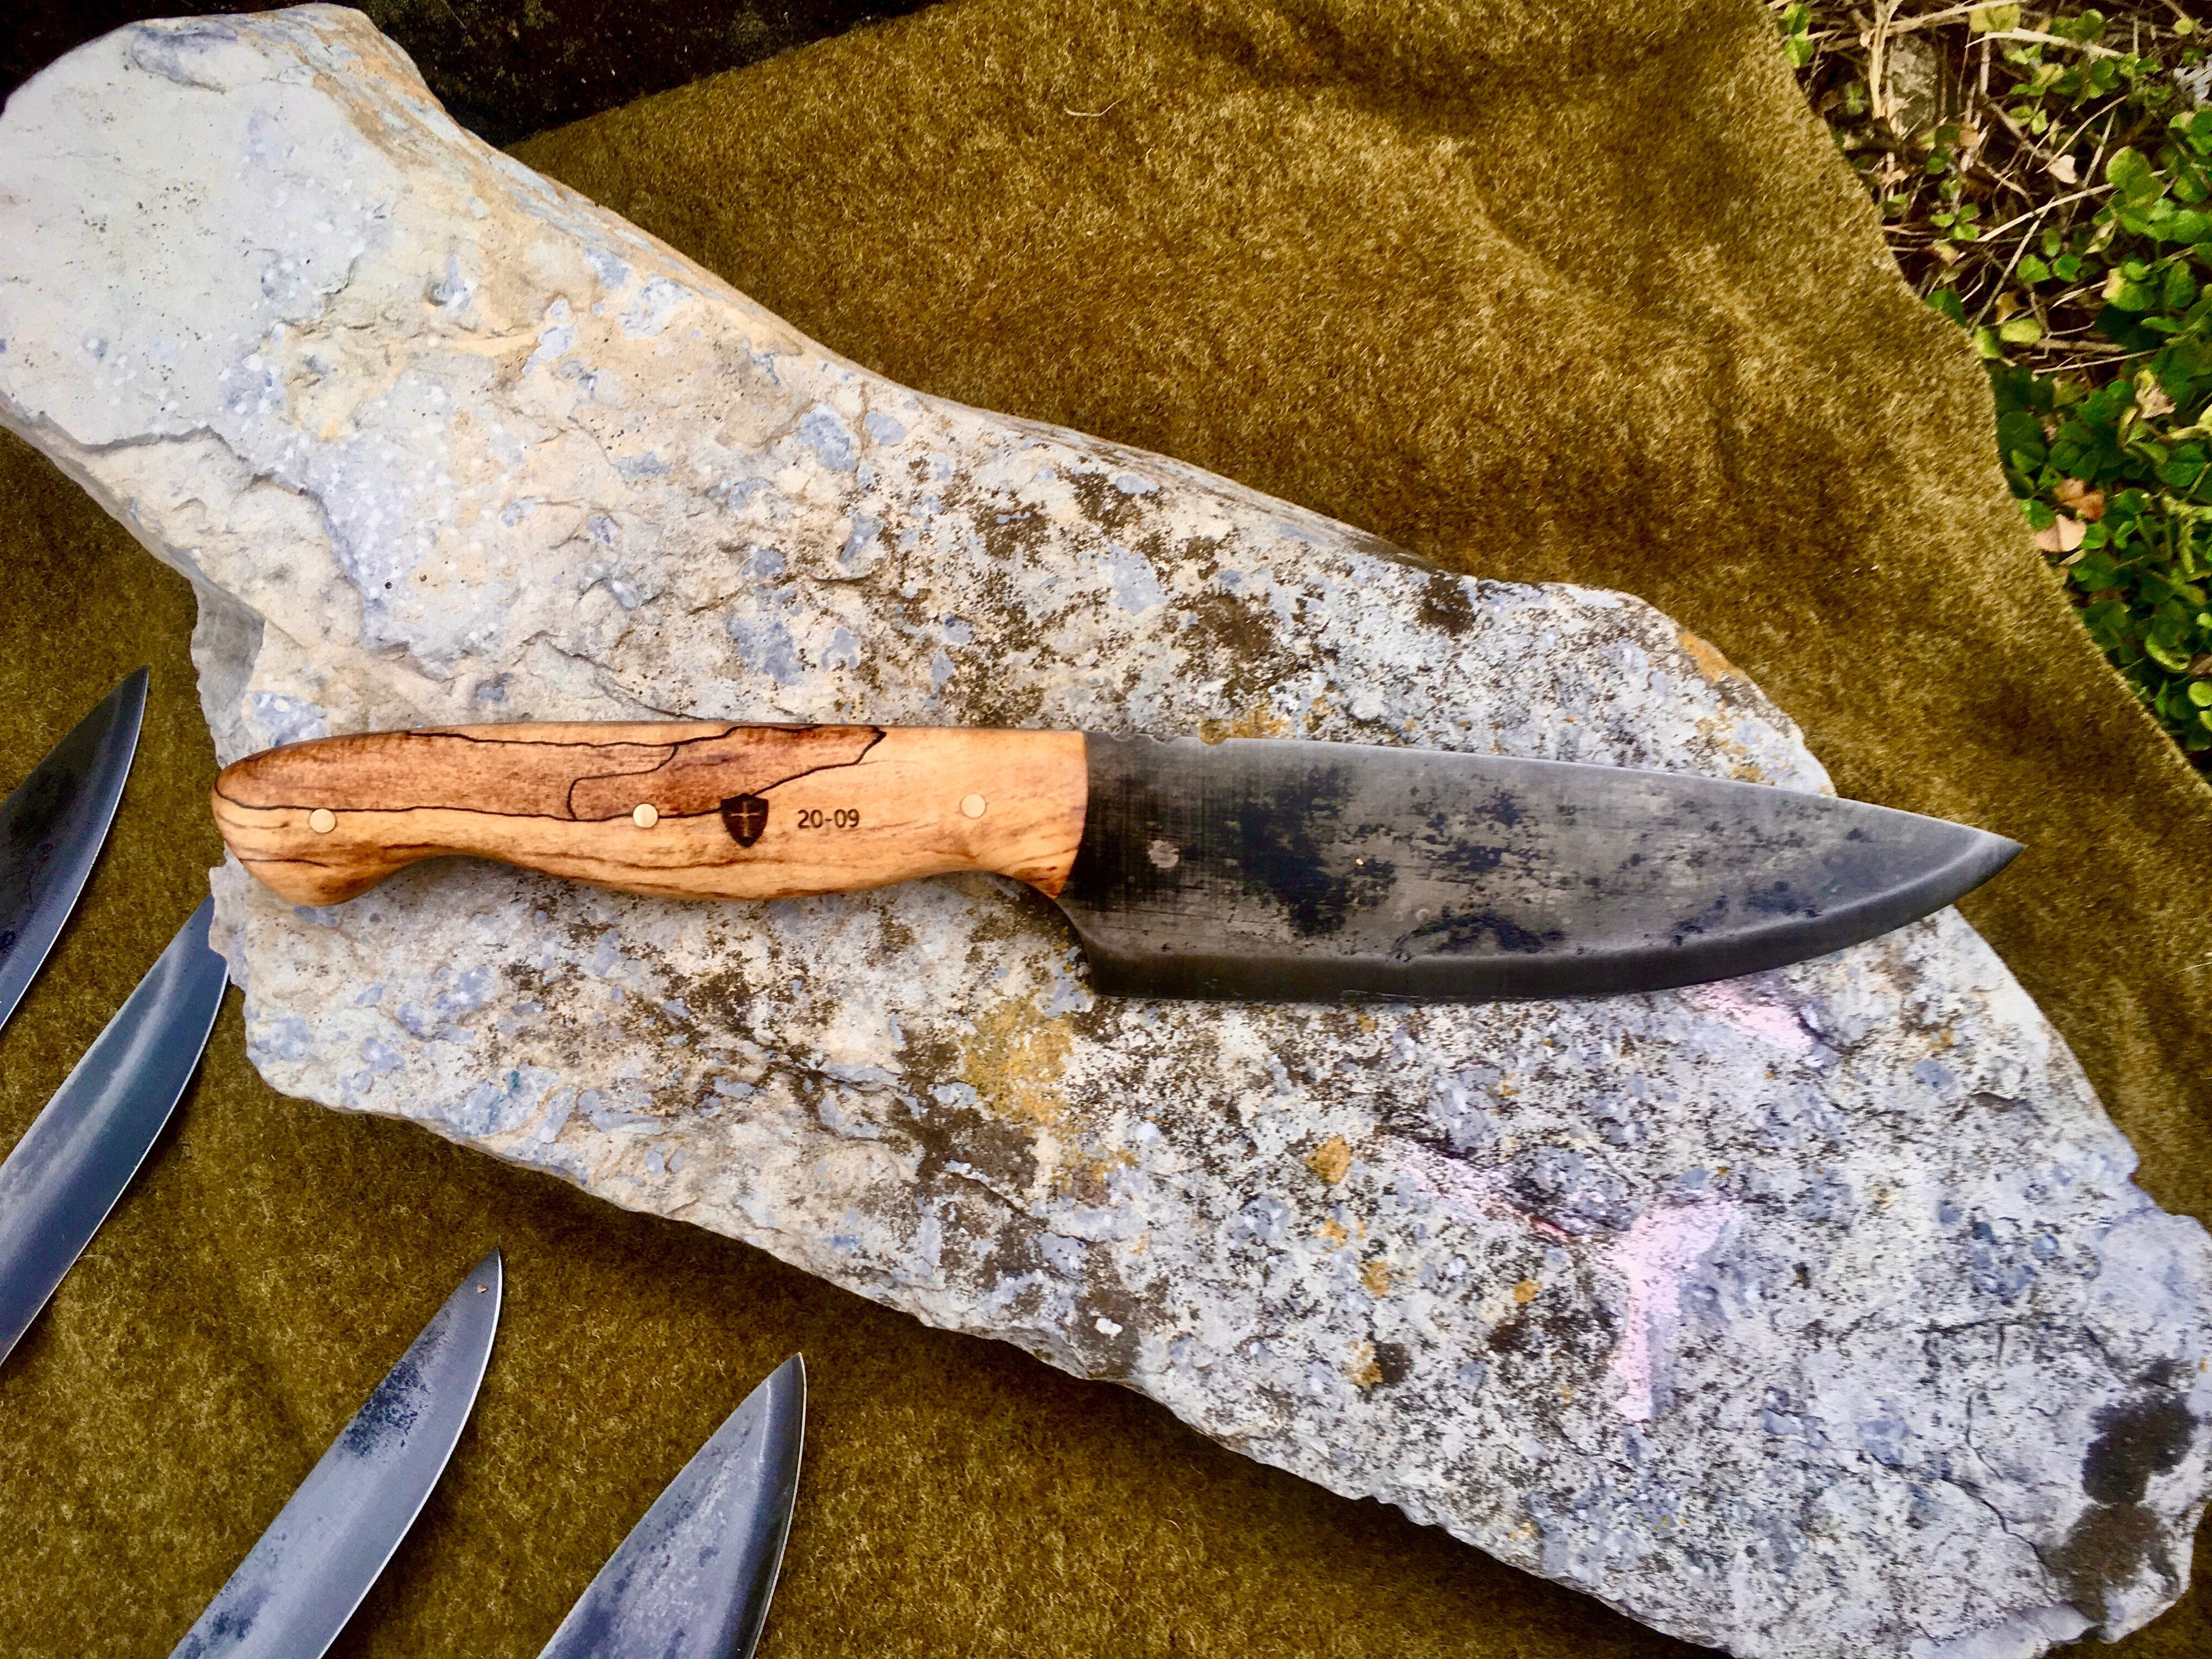 Hand Forged Paring Knife 20-04 – Zion's Farm